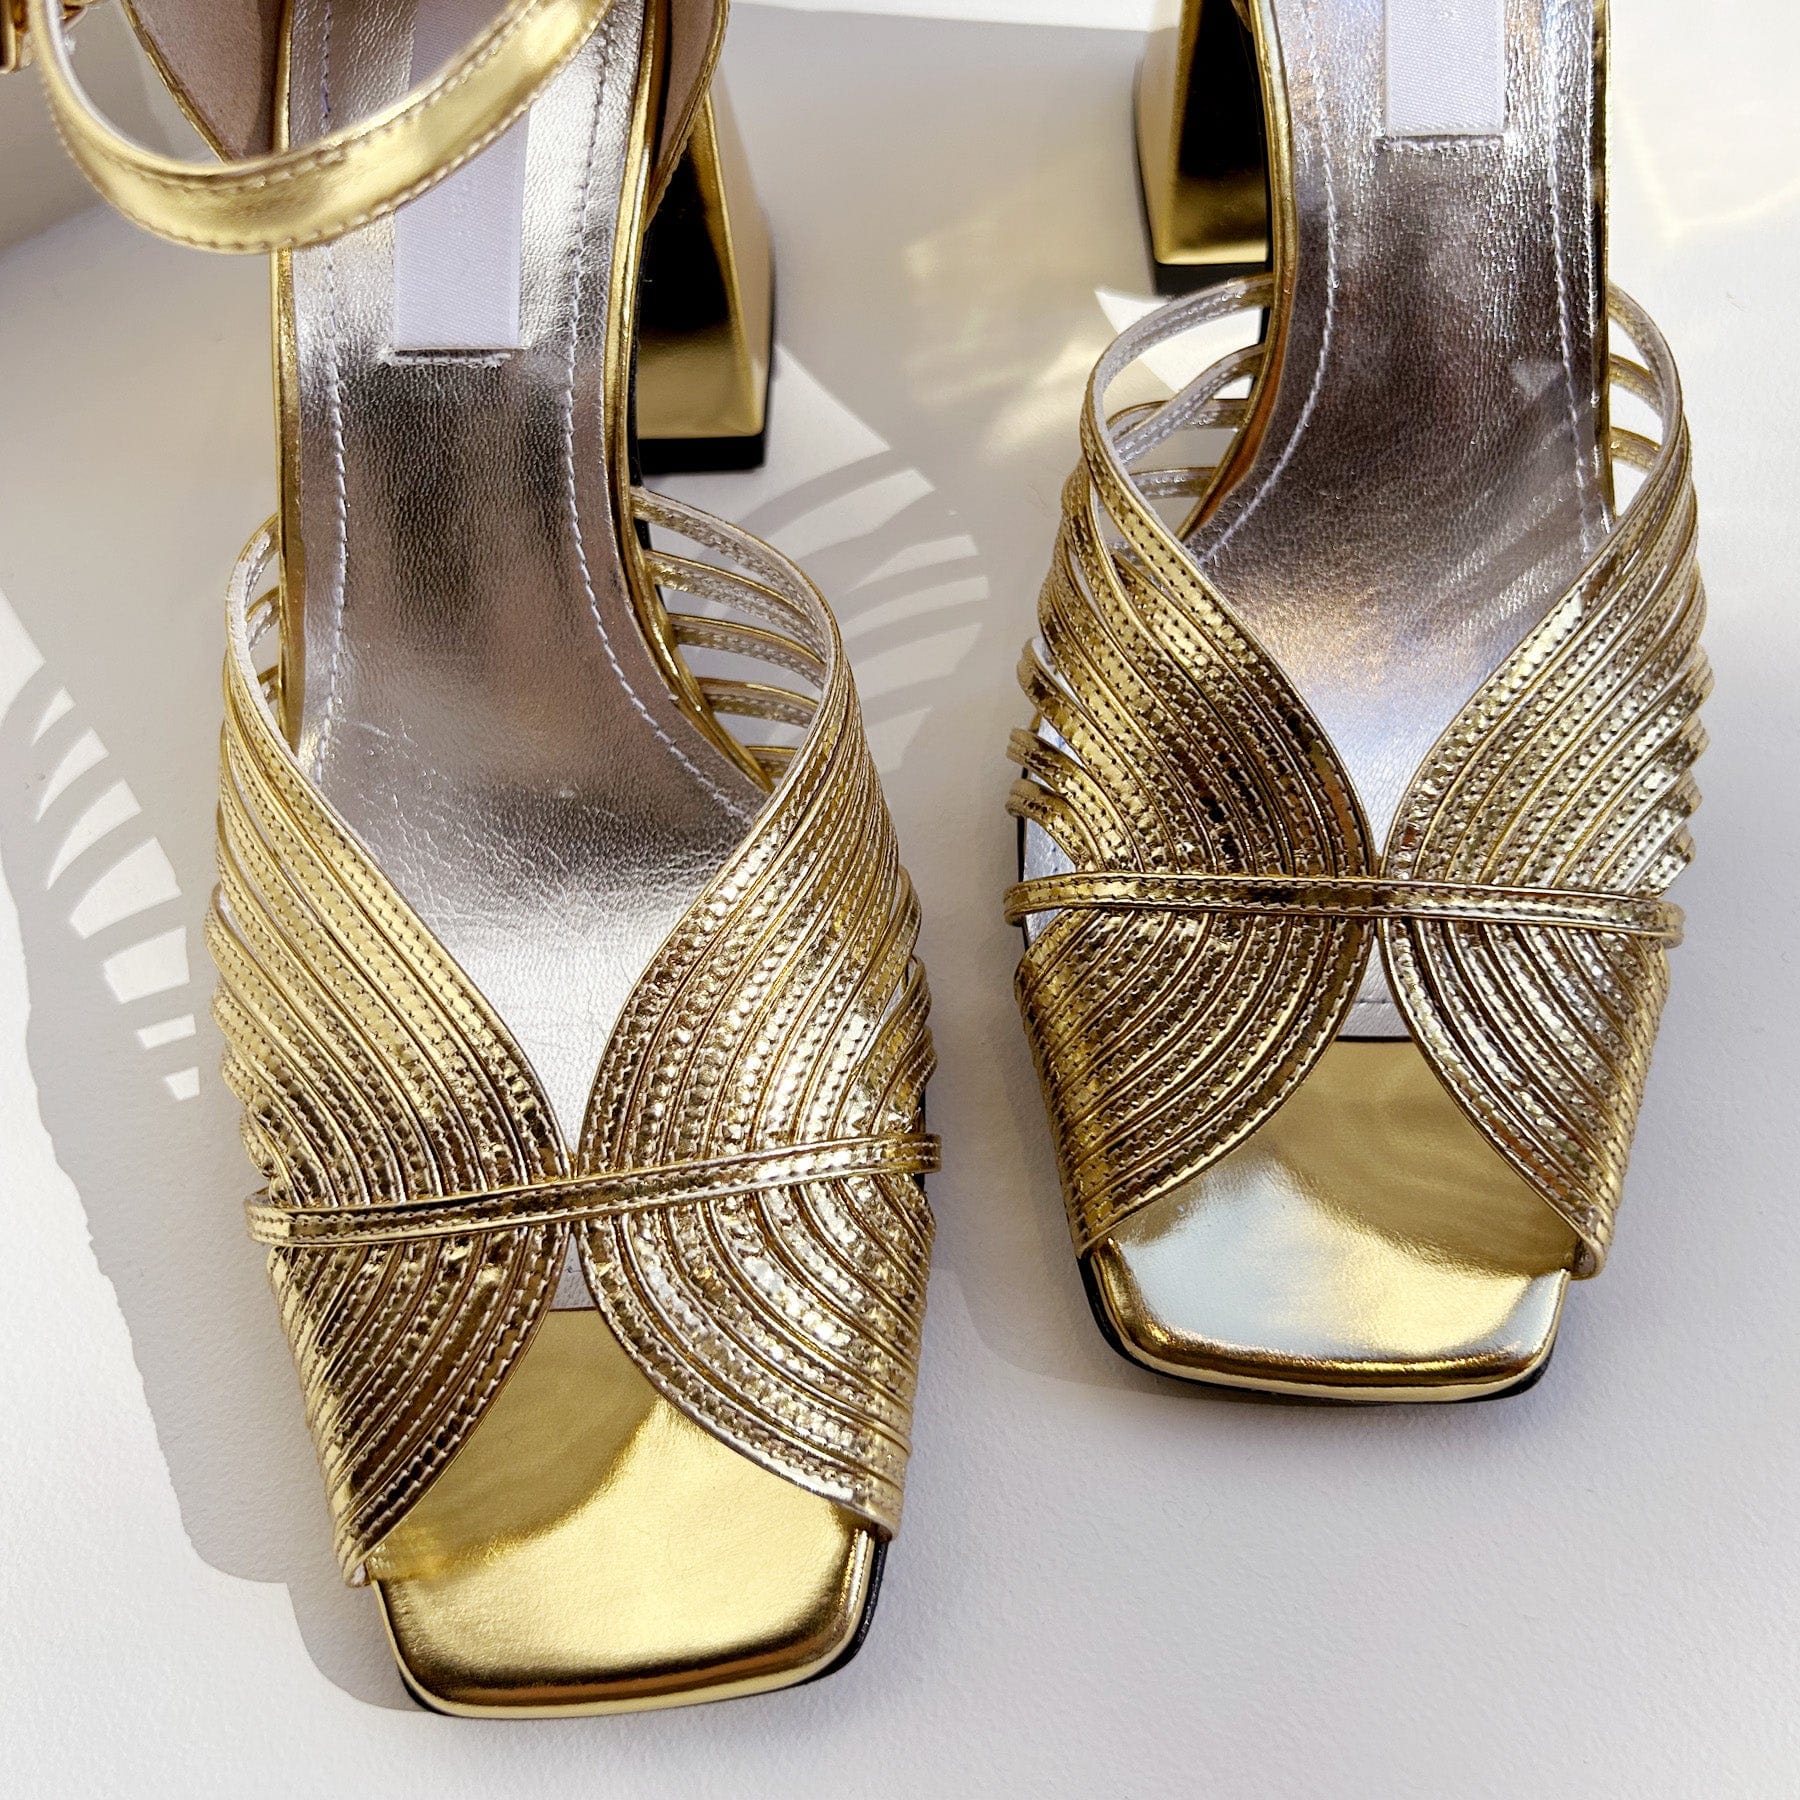 High 70's Sandal in Gold Mirror Shoes Suzanne Rae   